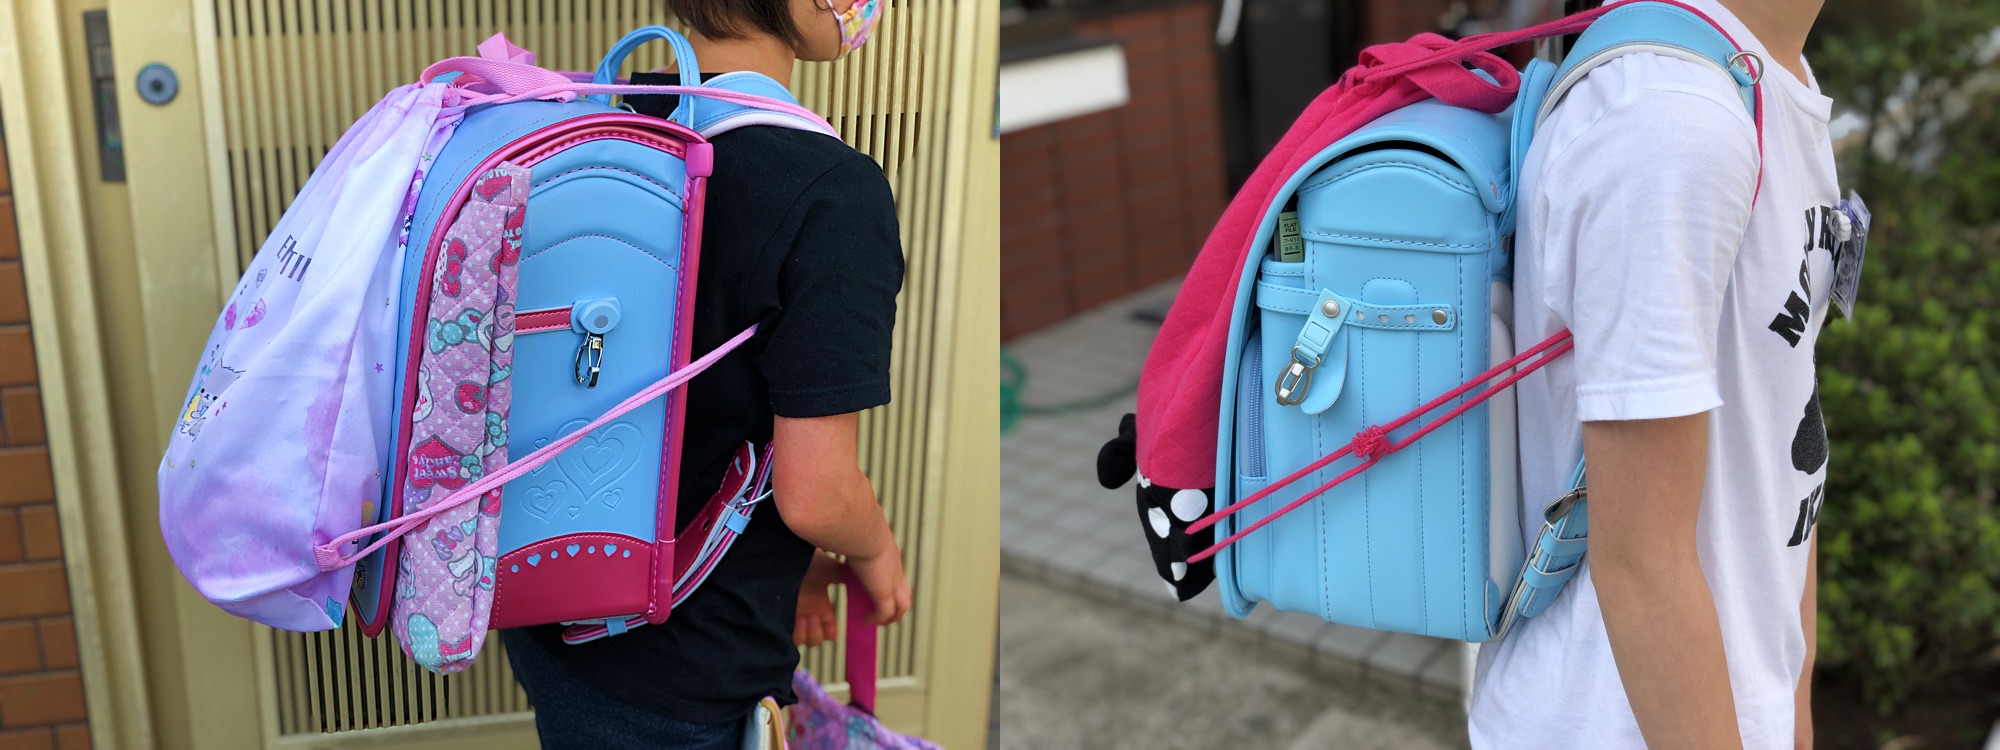 composite image showing two children carrying Japanese-style backpacks for school